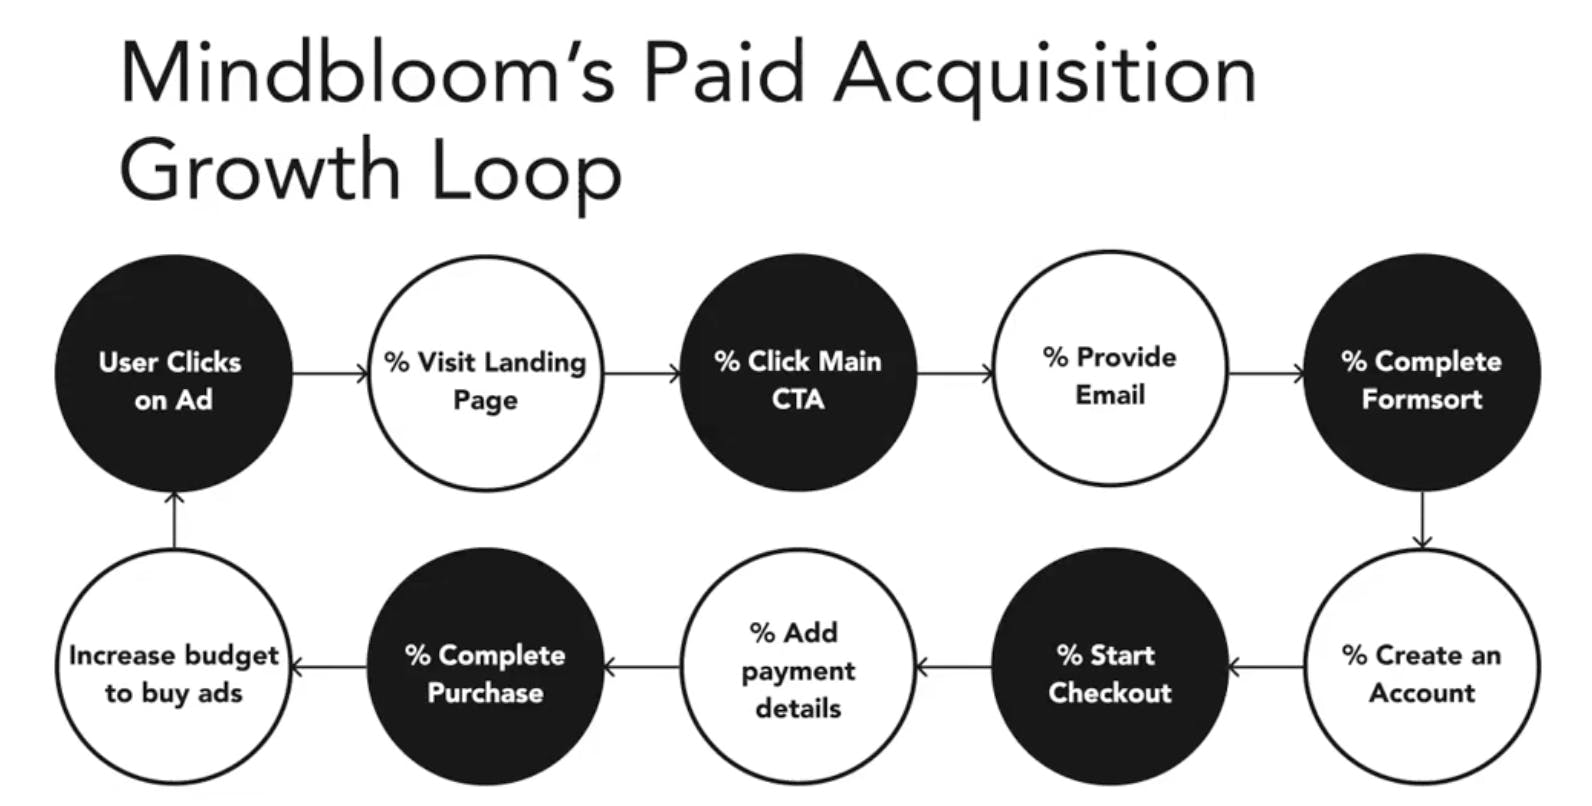 Mindbloom's paid acquisition growth loop